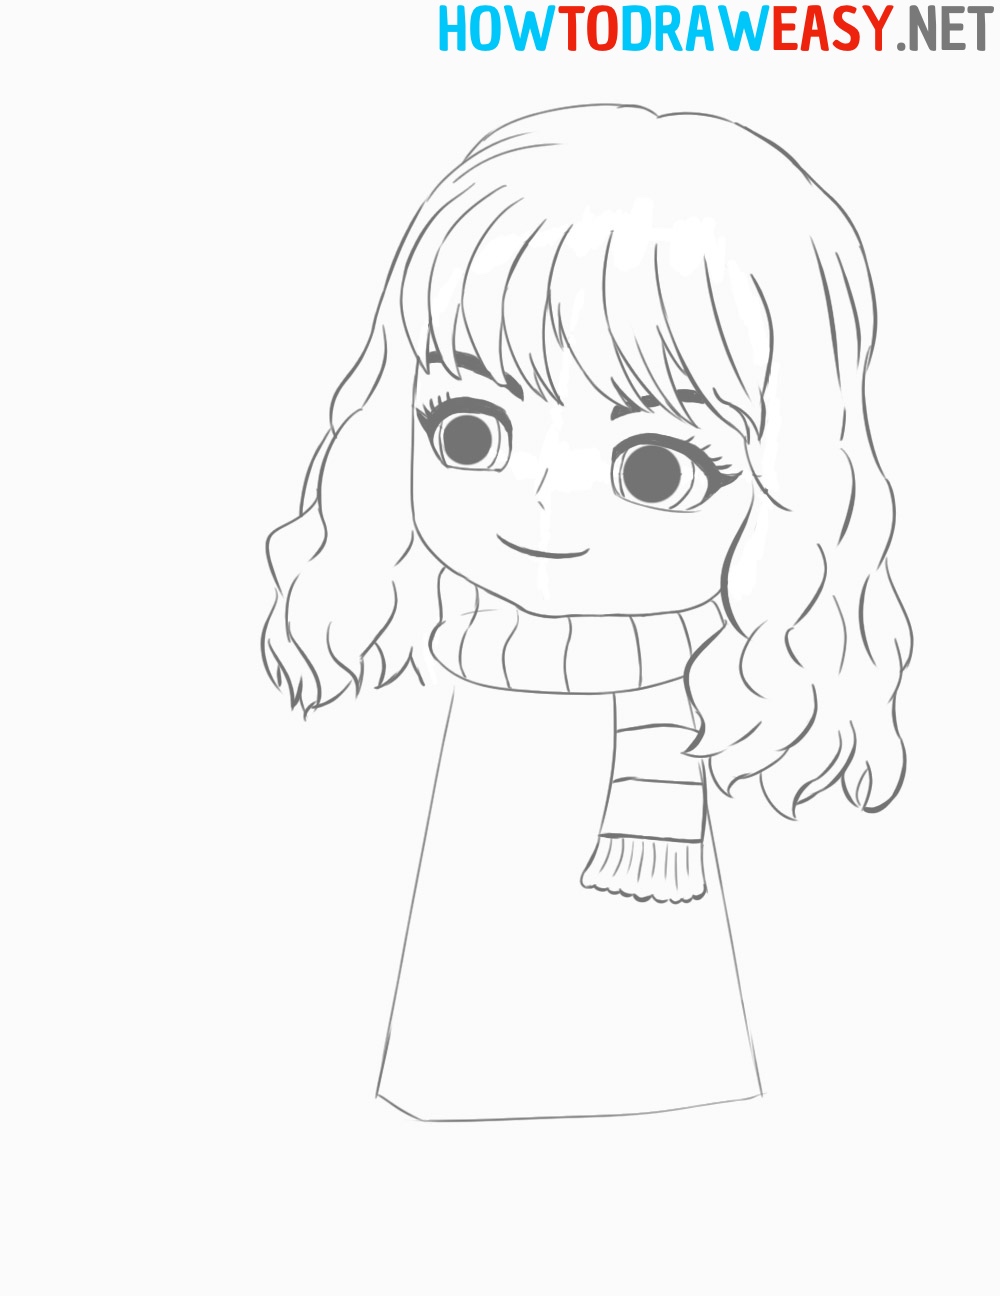 How to Drawing Hermione Granger